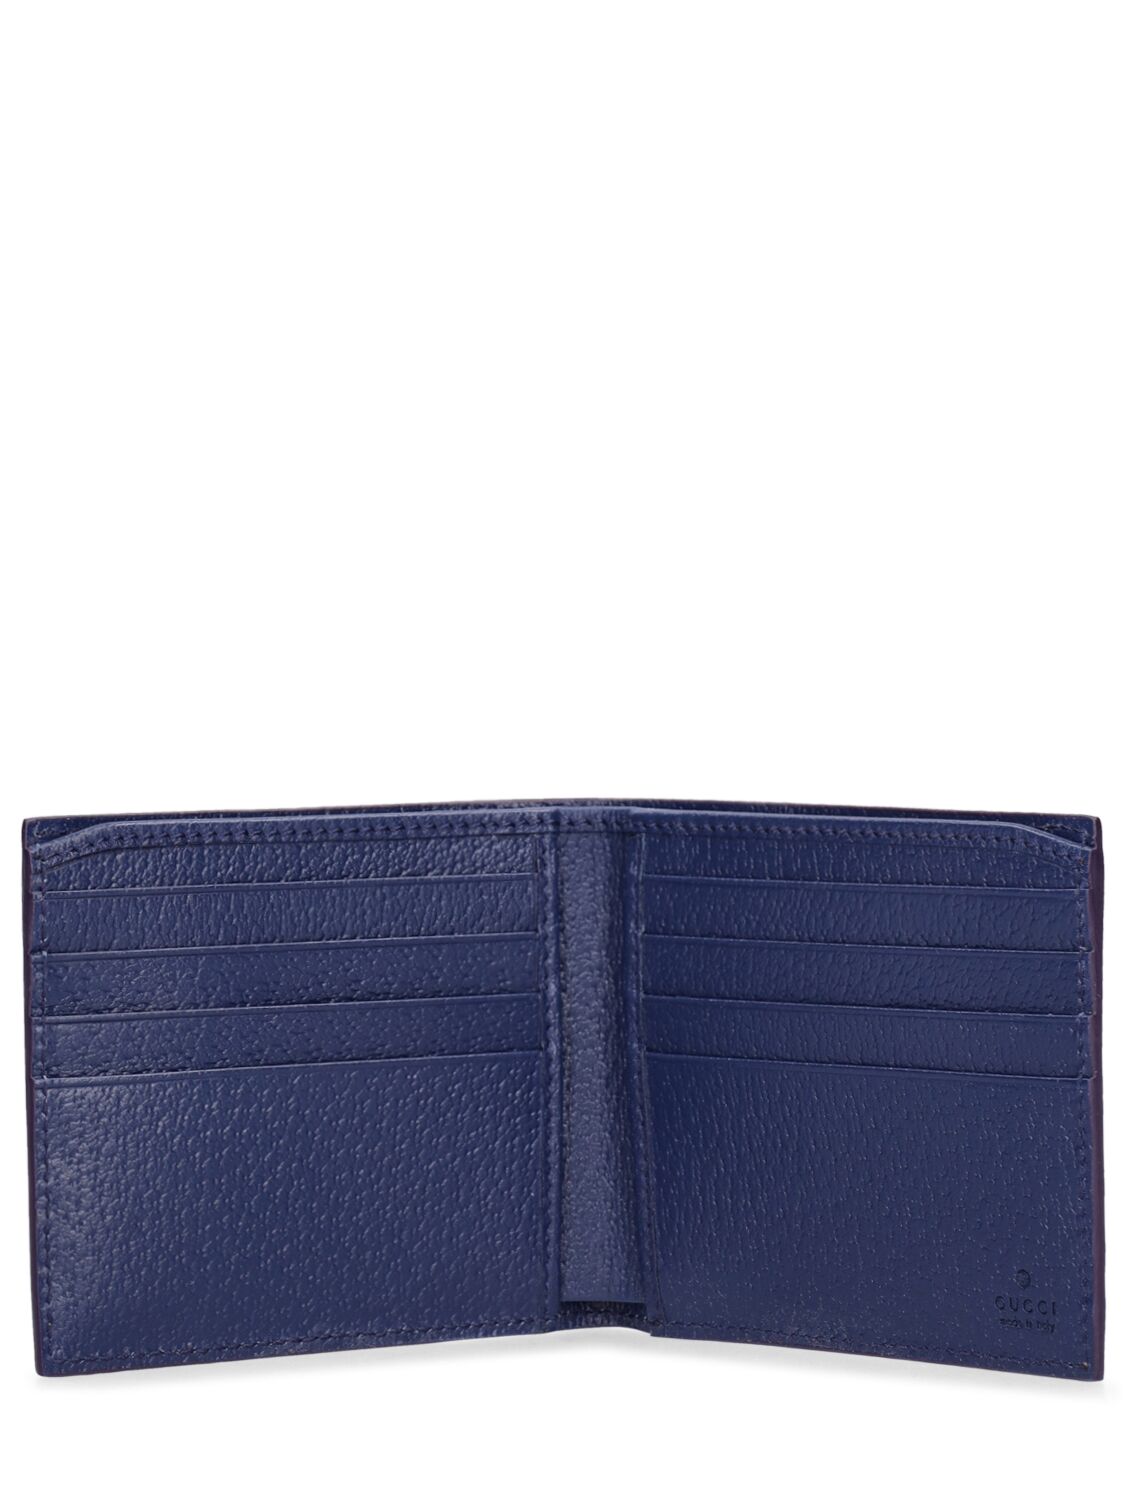 Gucci GG Leather Bifold Wallet in Blue for Men